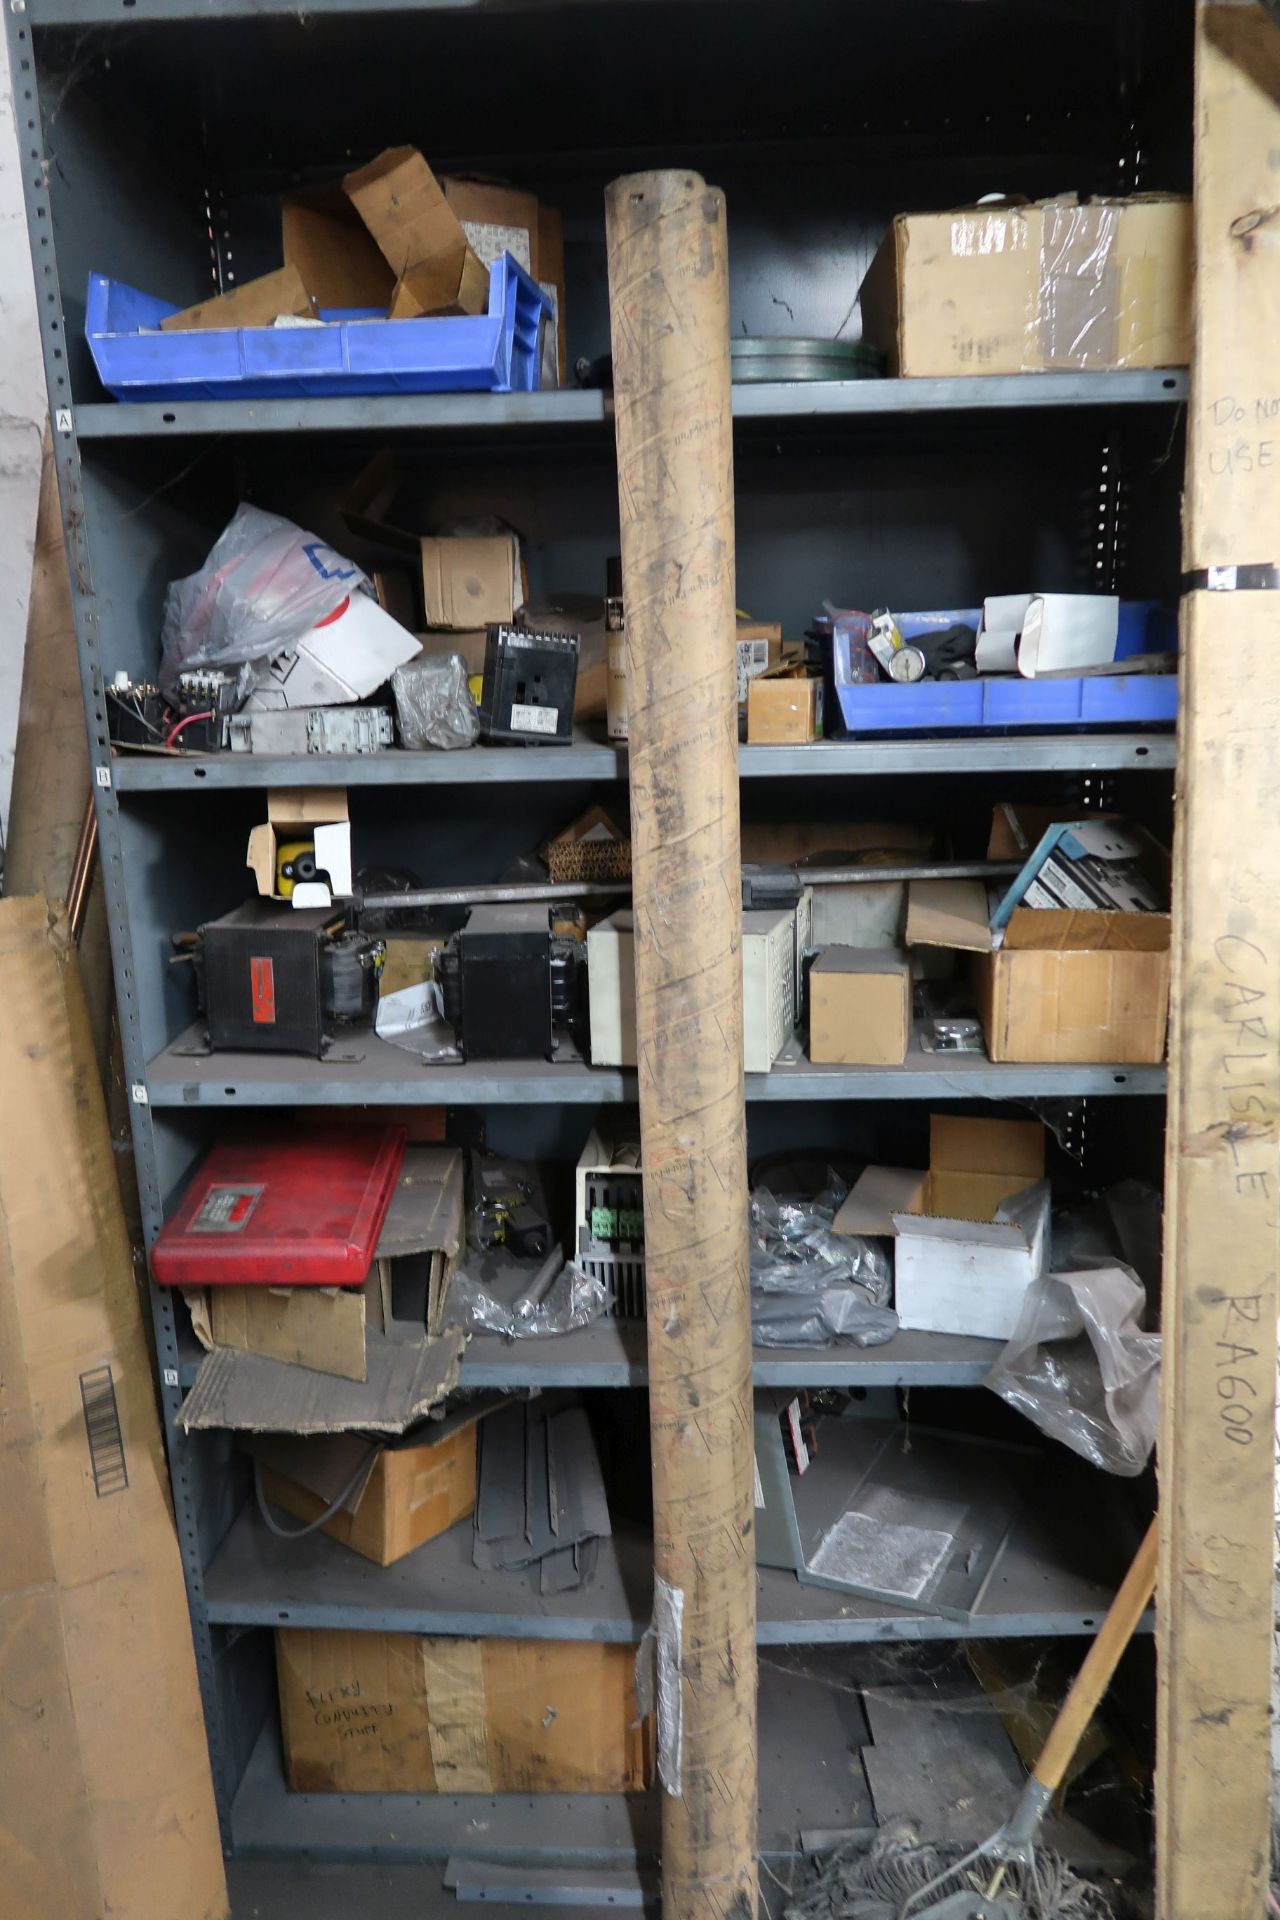 (LOT) CABINETS AND RACKS WITH MAINTENANCE SUPPLIES UNDER STEP **LOADING PRICE DUE TO ERRA - $1,500. - Image 3 of 15